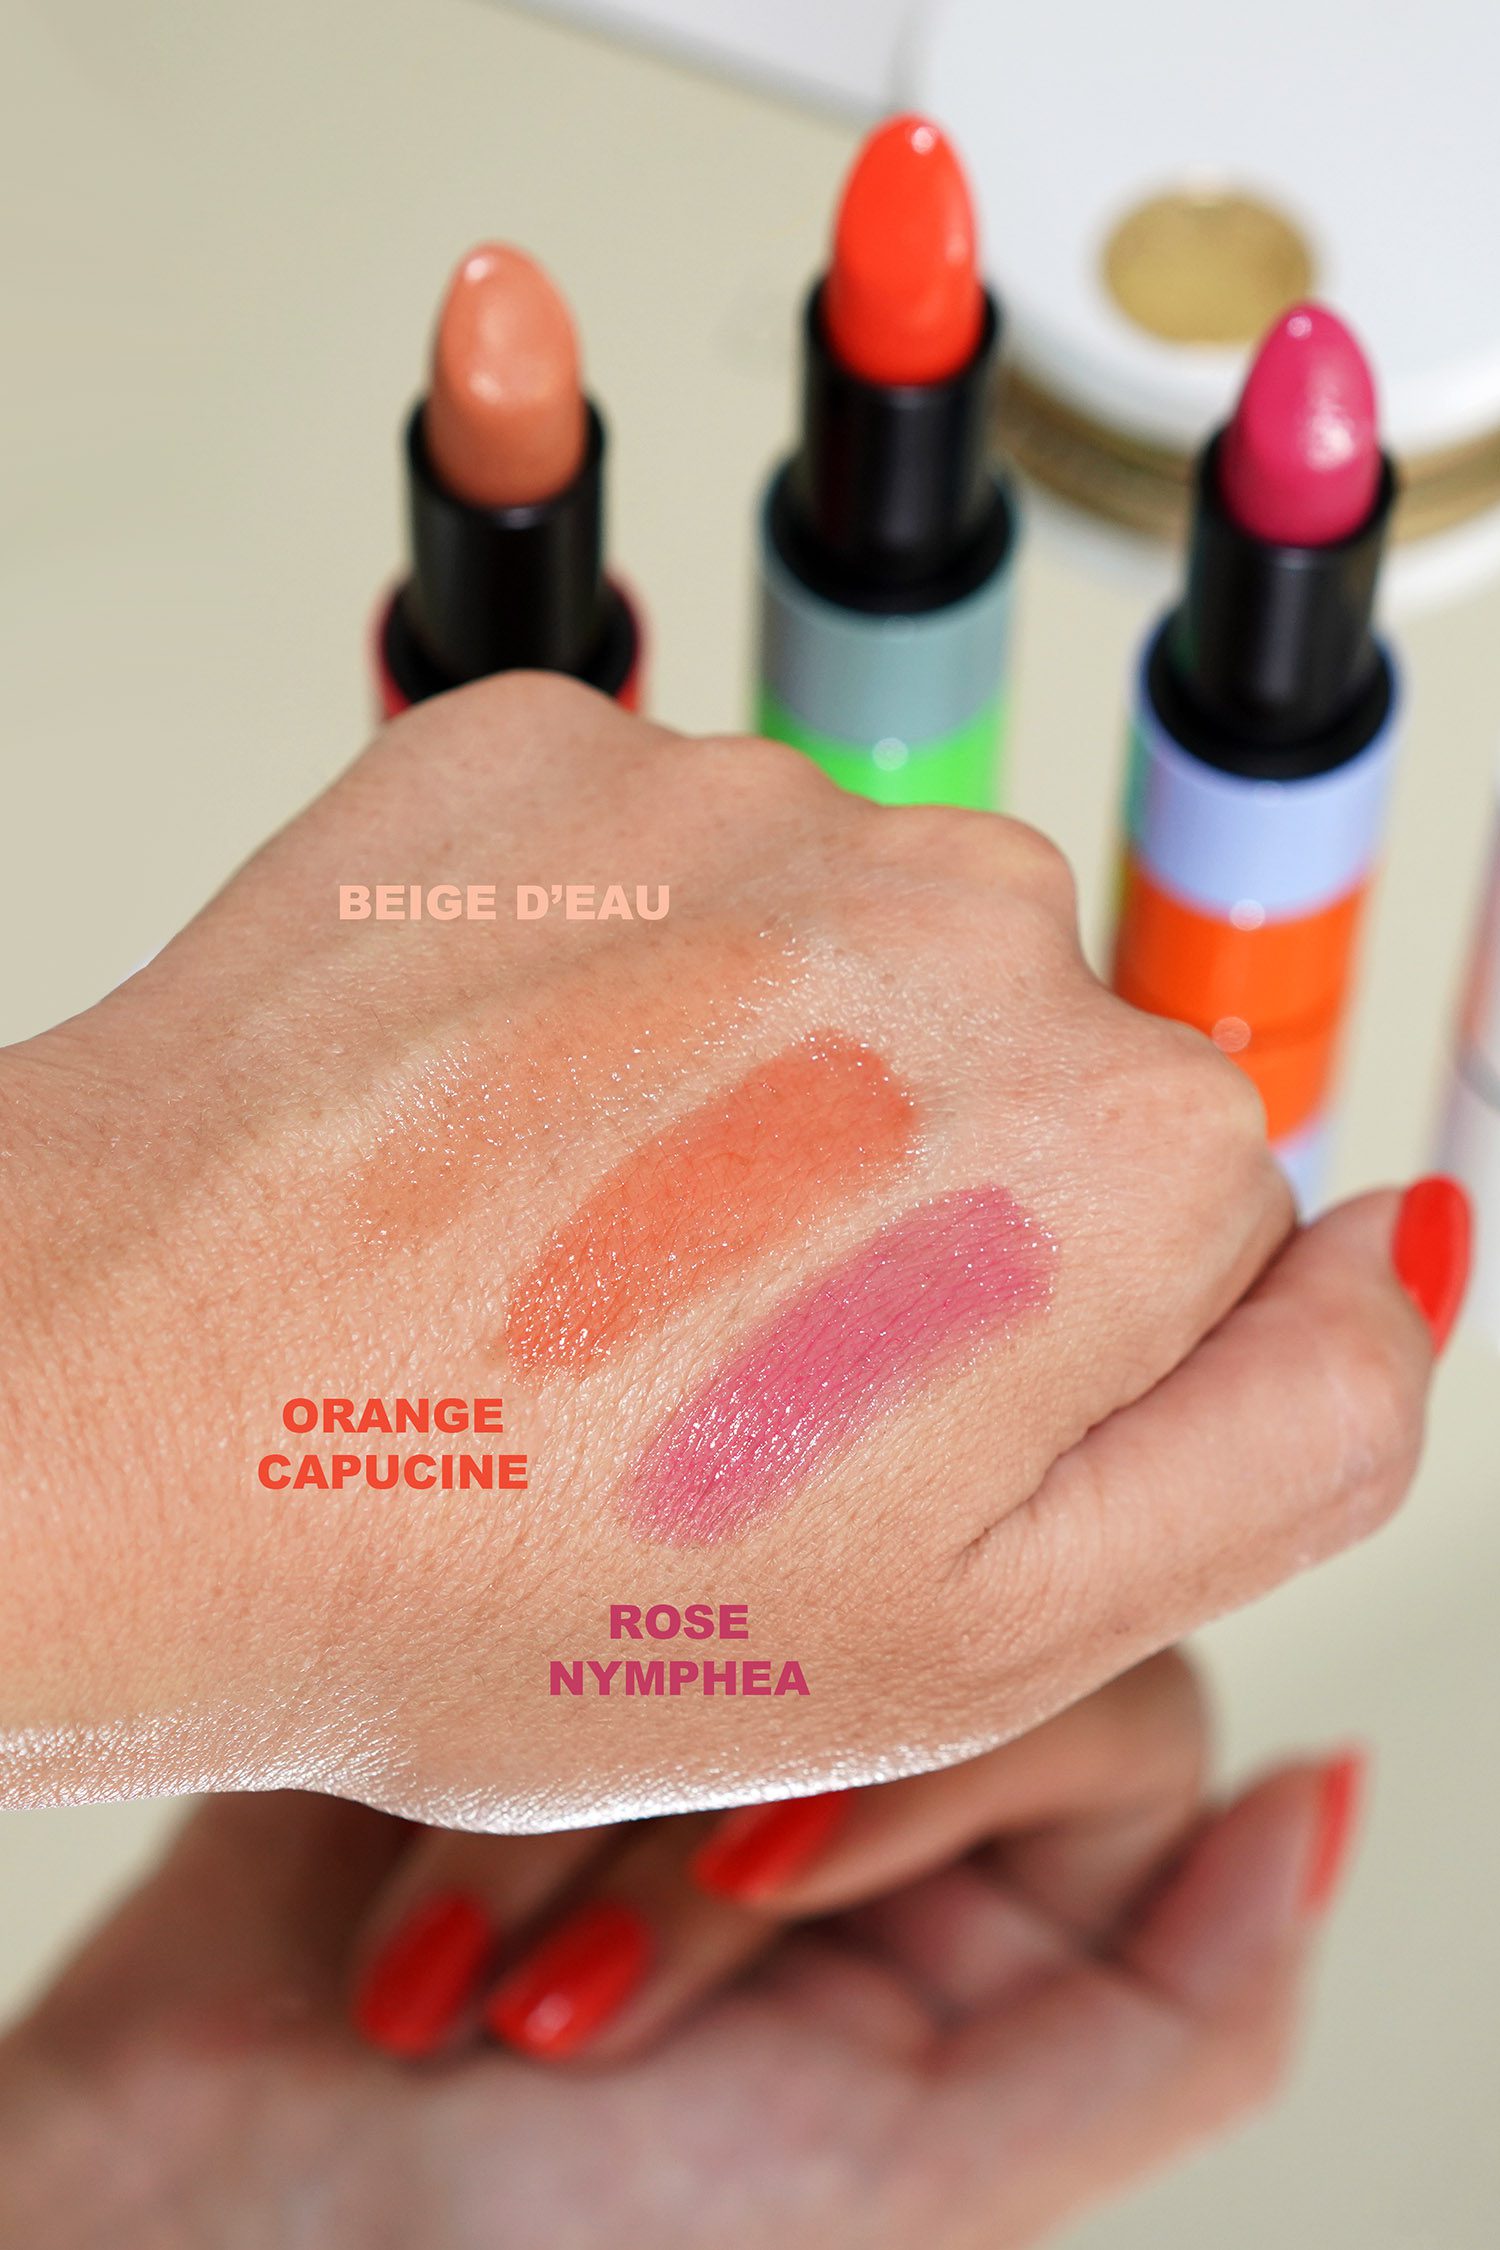 NEW HERMES LIP ENHANCERS  Swatches & Review of All 3 Shades + Poppy Lip  Shine Comparison 